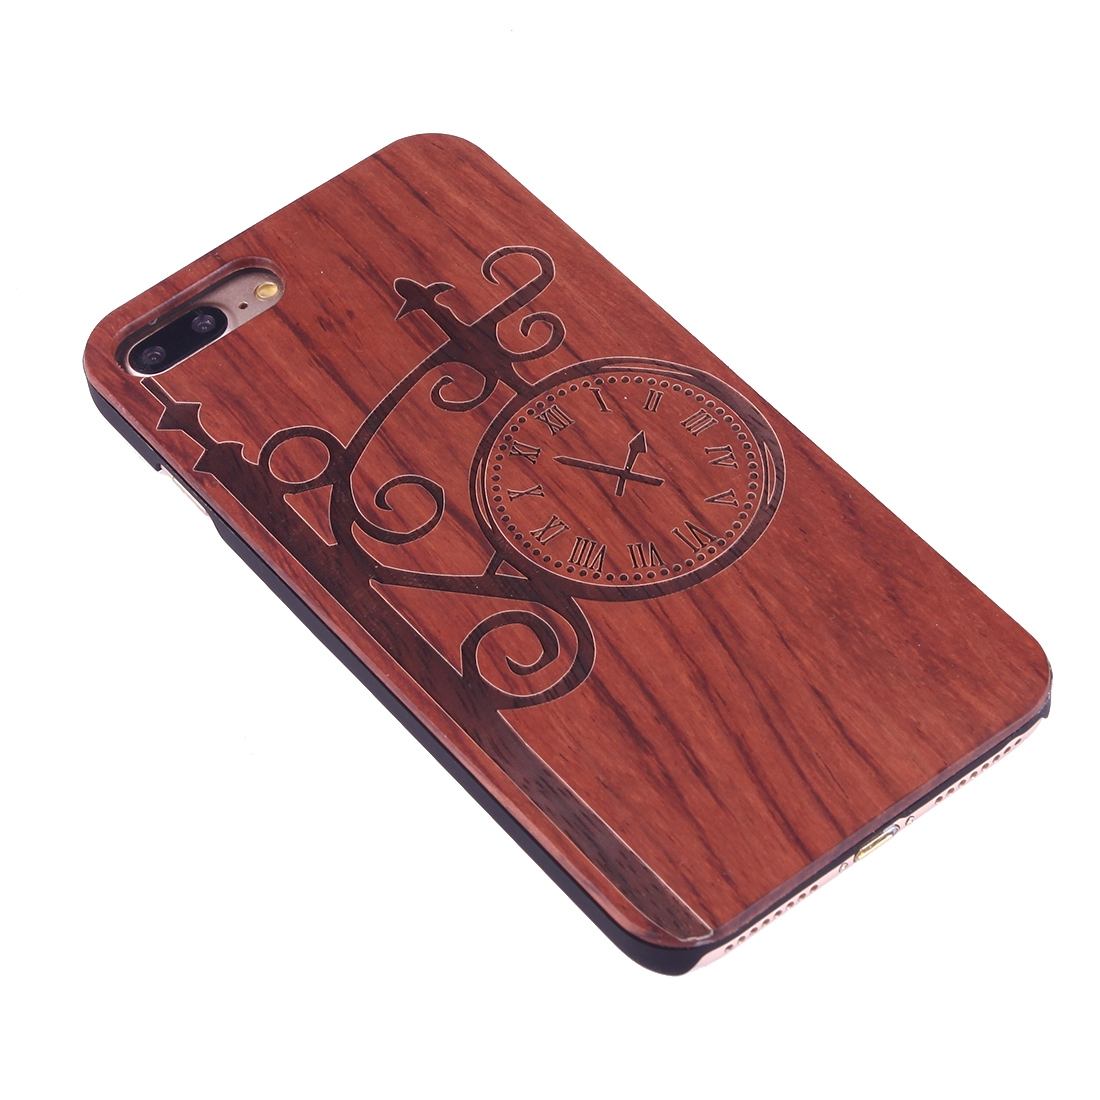 For iPhone 8 PLUS,7 PLUS Case,Rosewood Street Clock Wooden Protective Cover